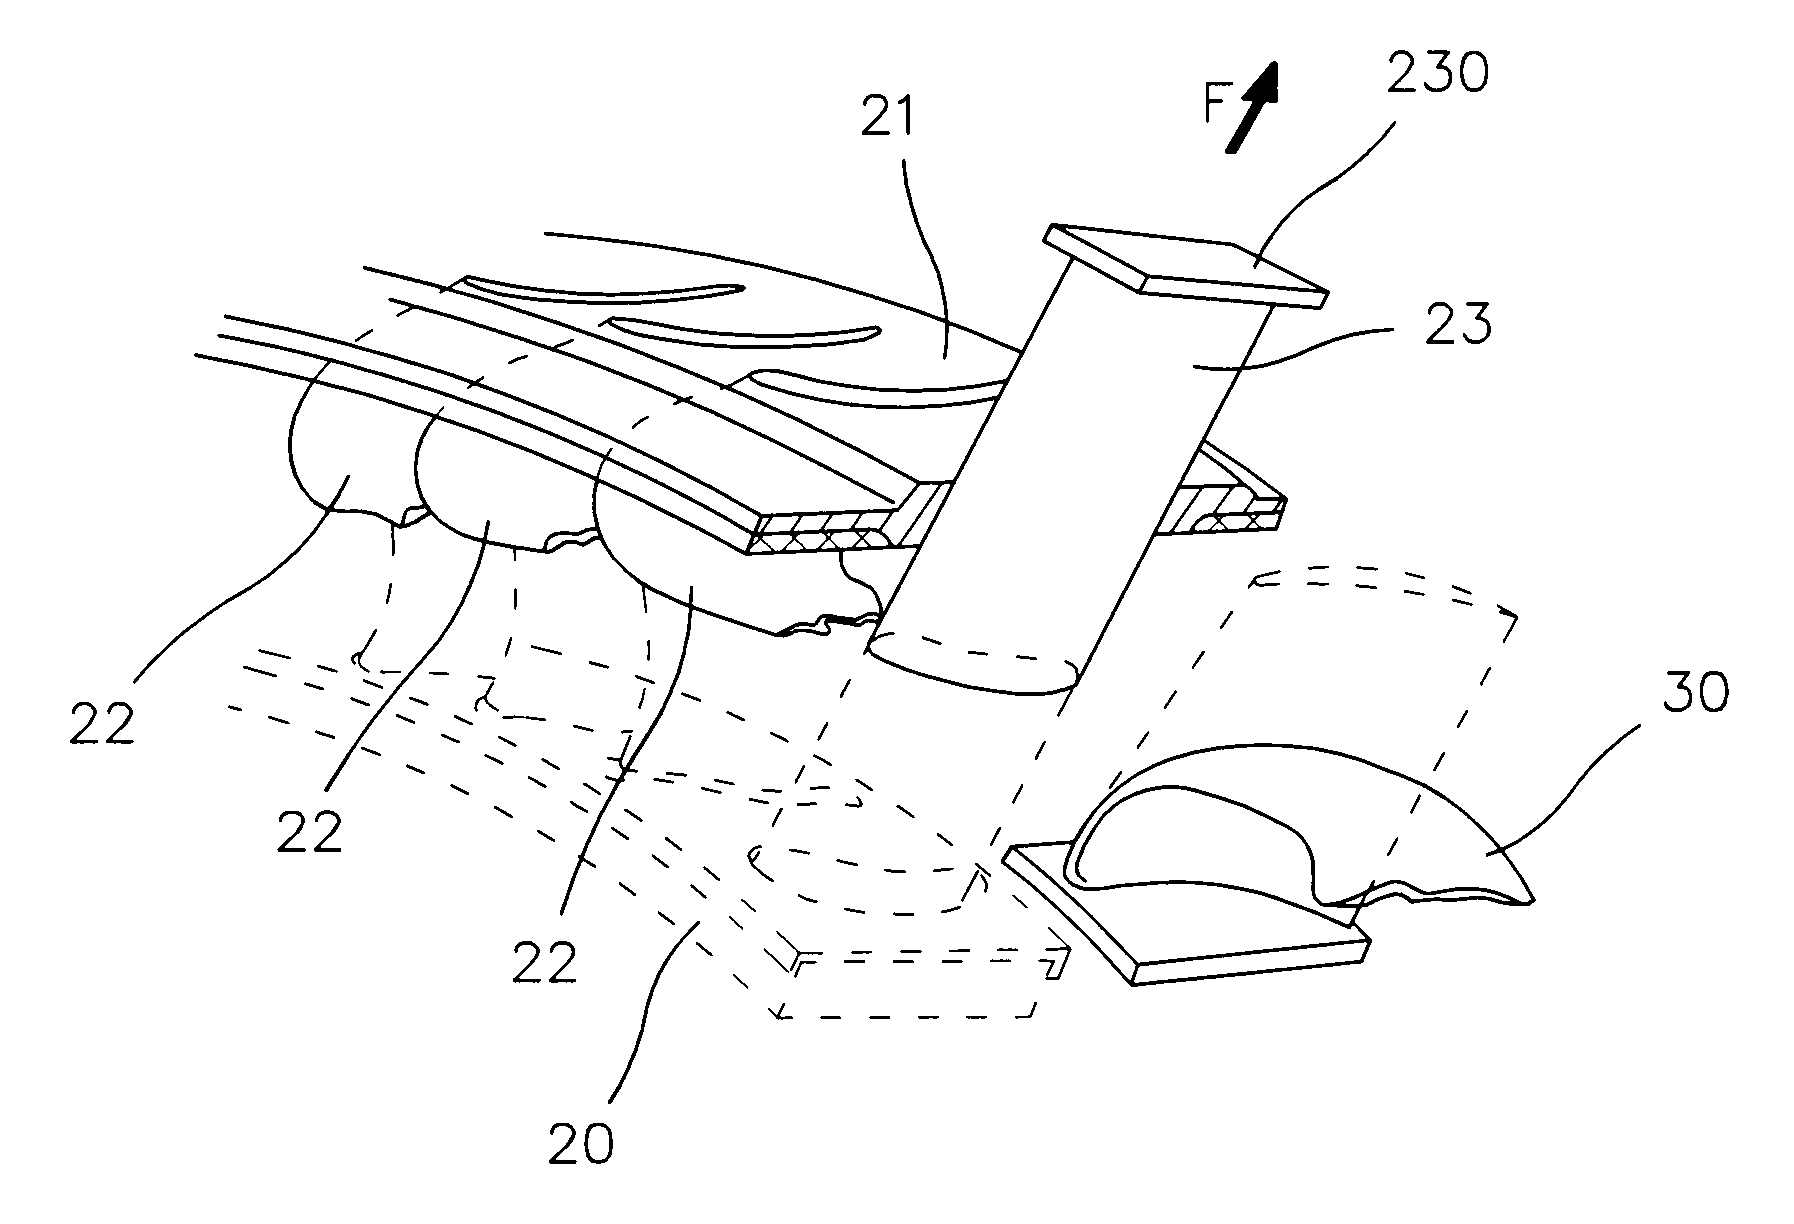 Device for stiffening the stator of a turbomachine and application to aircraft engines